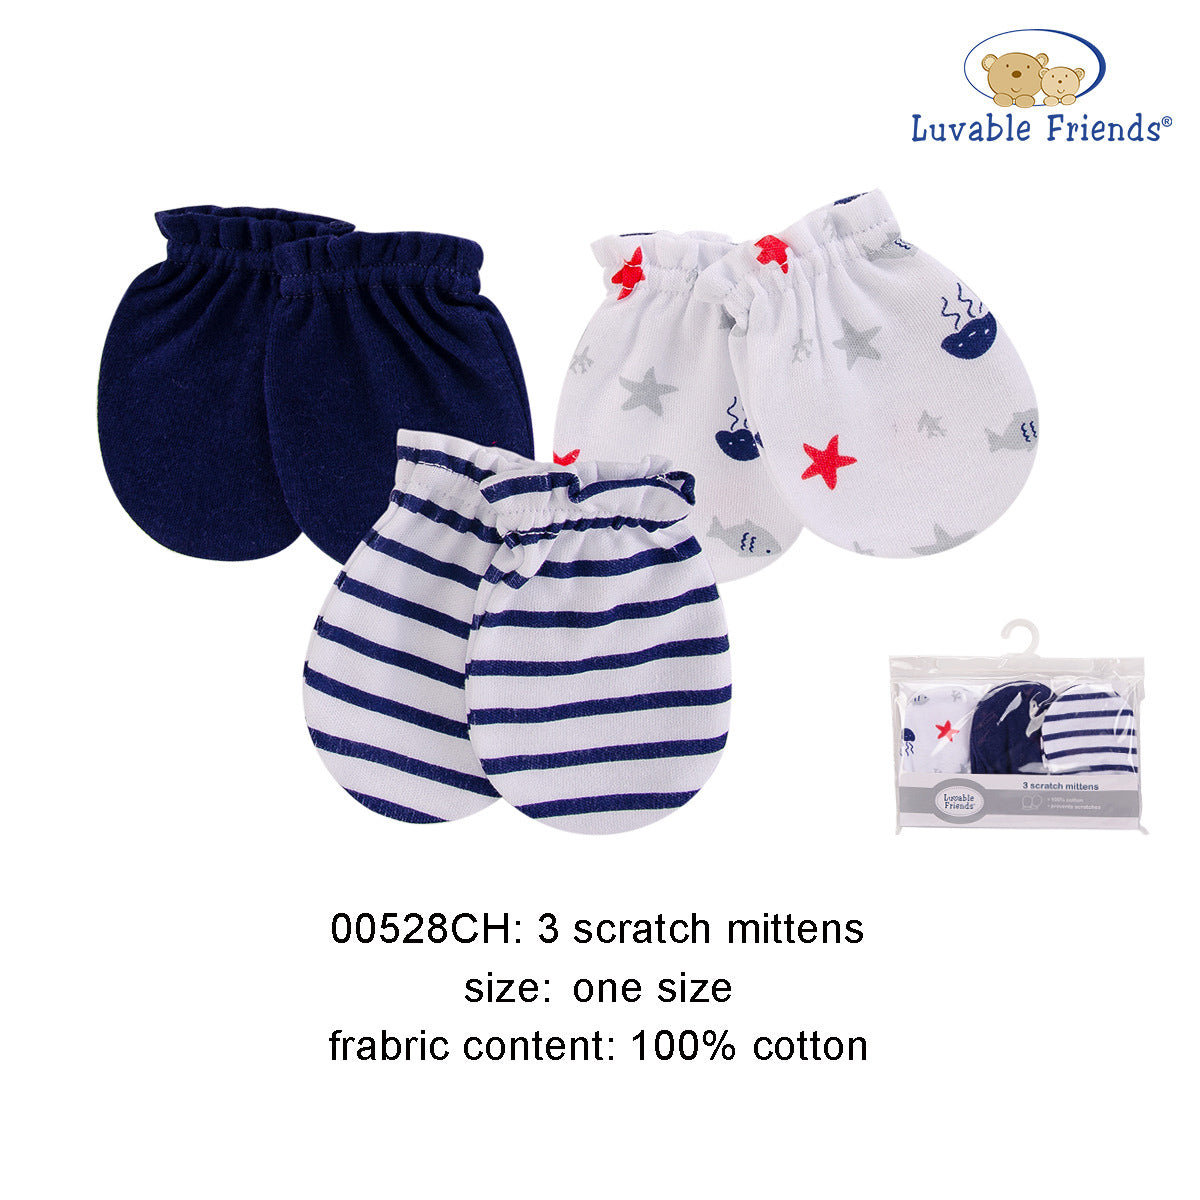 Luvable Friends Baby Scratch Mittens 3 Pairs Pack 00528 - Little Kooma